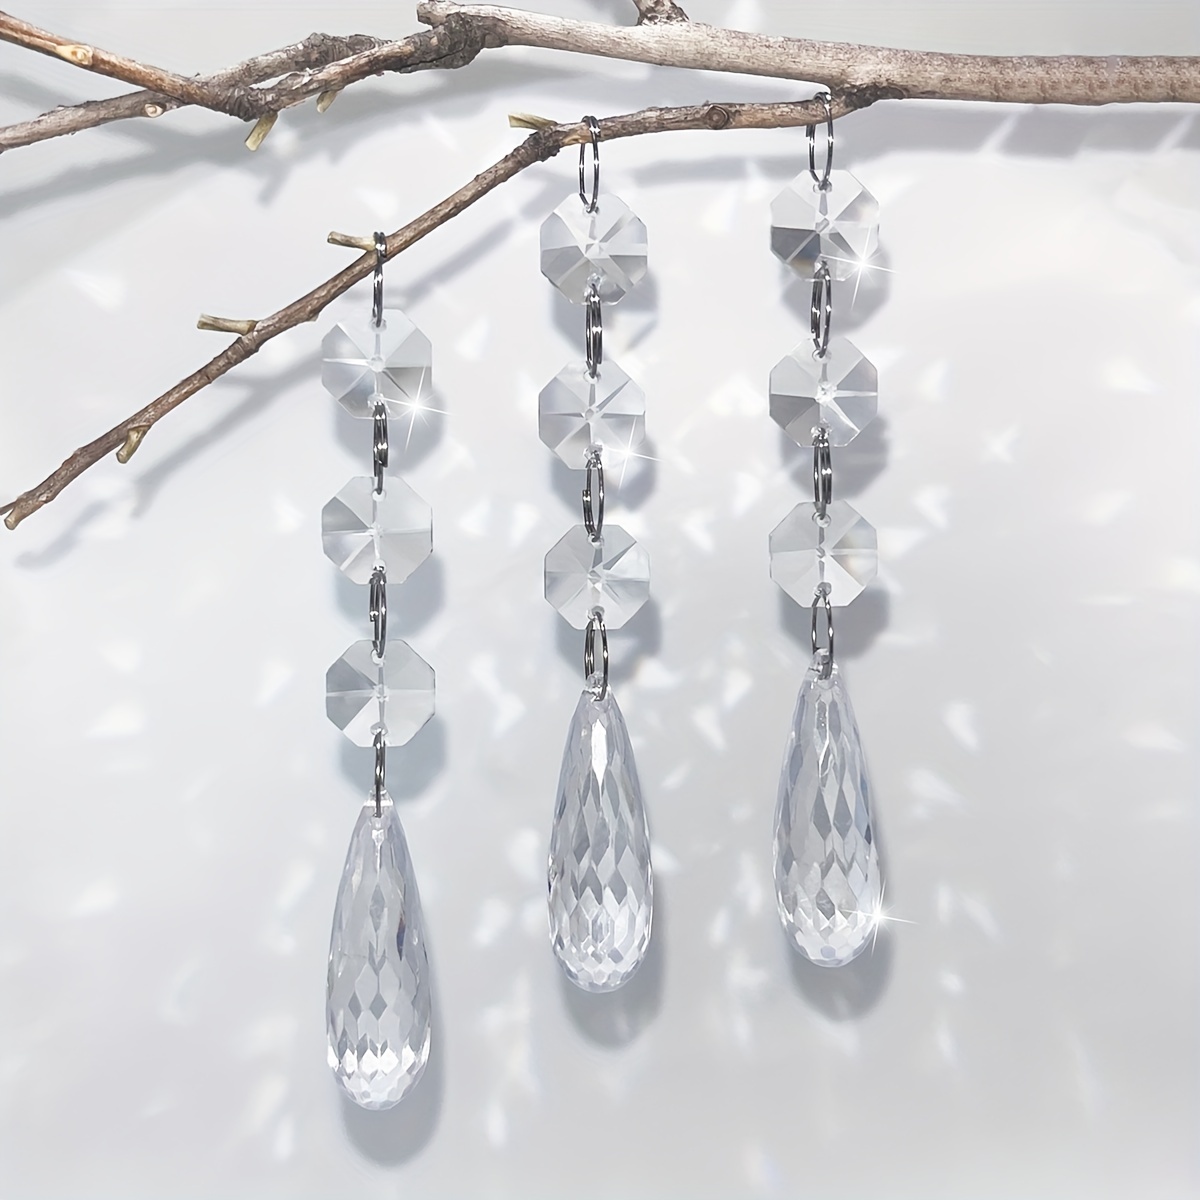 

30pcs, Drop-shaped Crystal Hanging Ornaments, Suitable For Chandeliers, Table Lamps, Flower Stands, Candlesticks, Gardens, Weddings, Party Decorations.